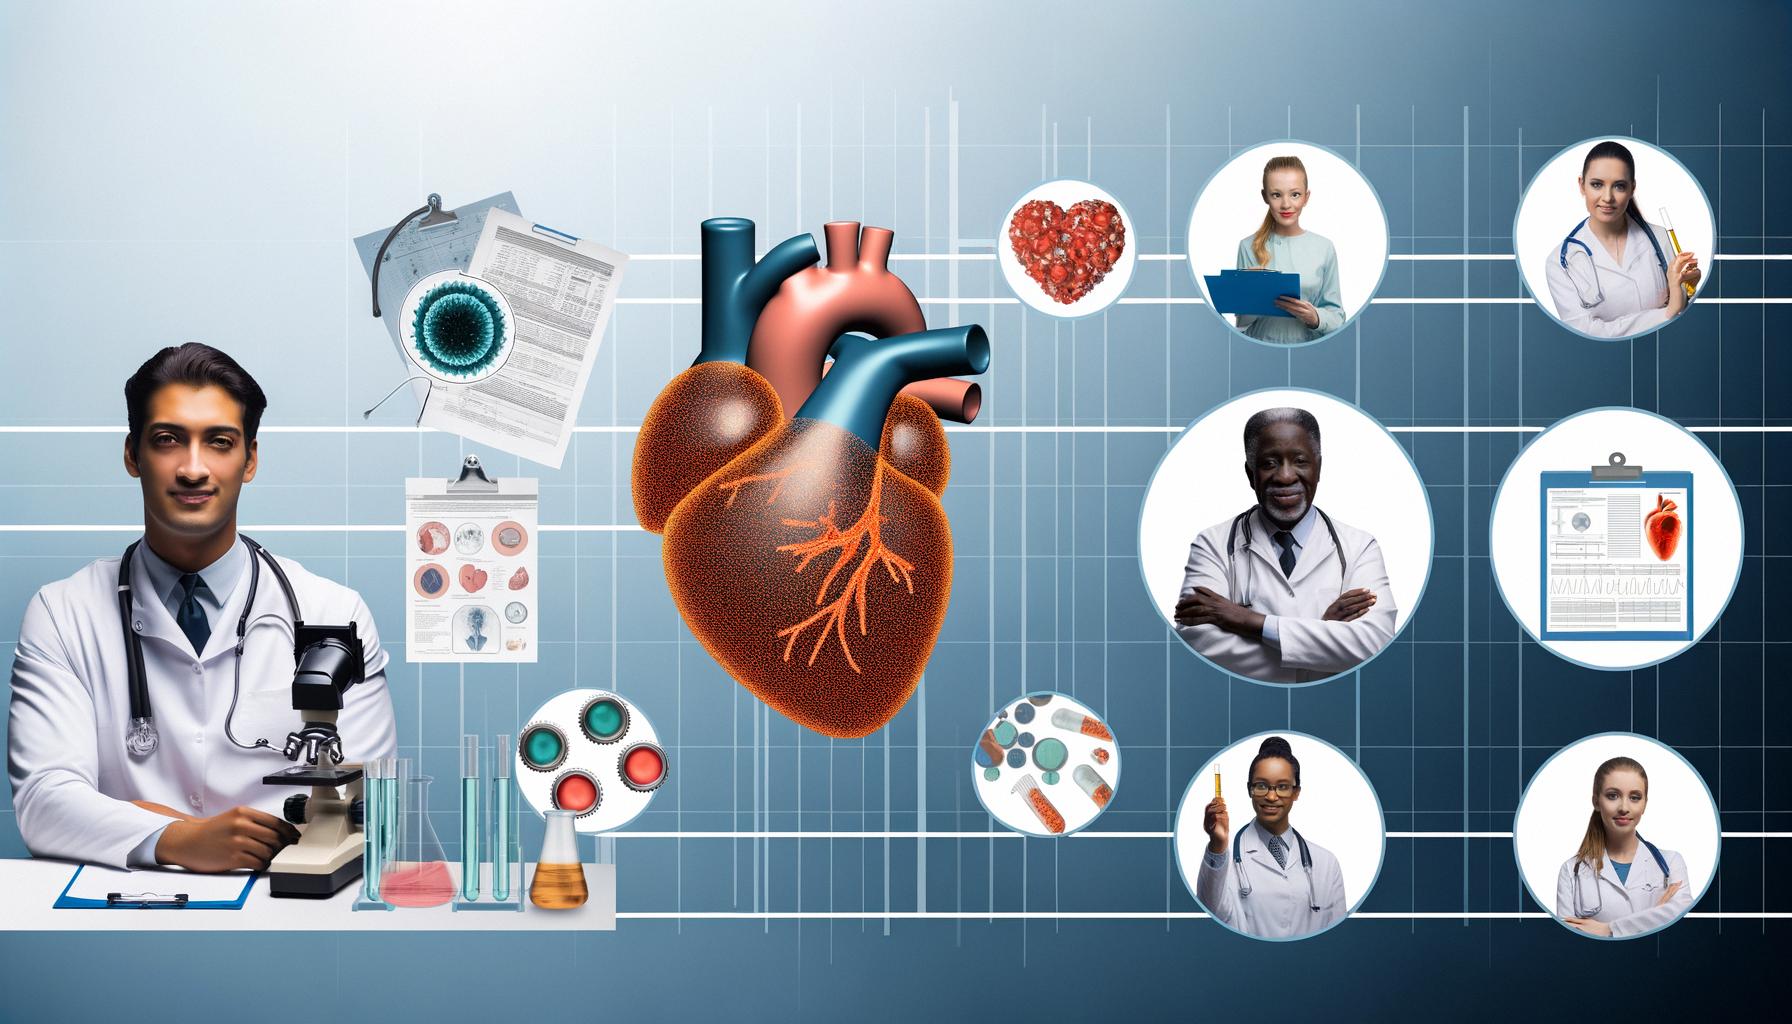 Recent innovations and discoveries in heart disease research impact treatment and risk factors